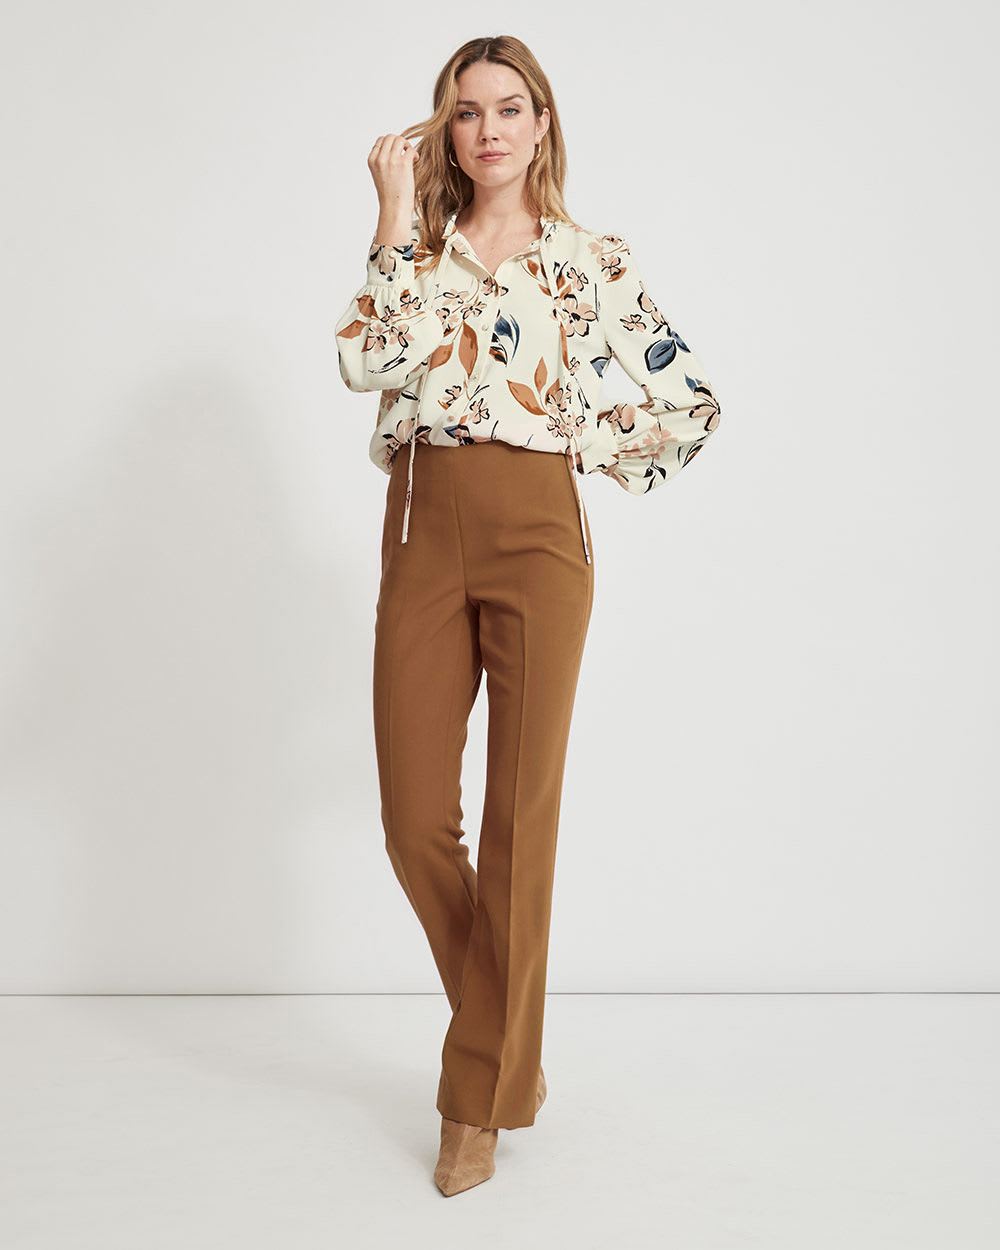 Stretch High-Waised Flare Pants - 33